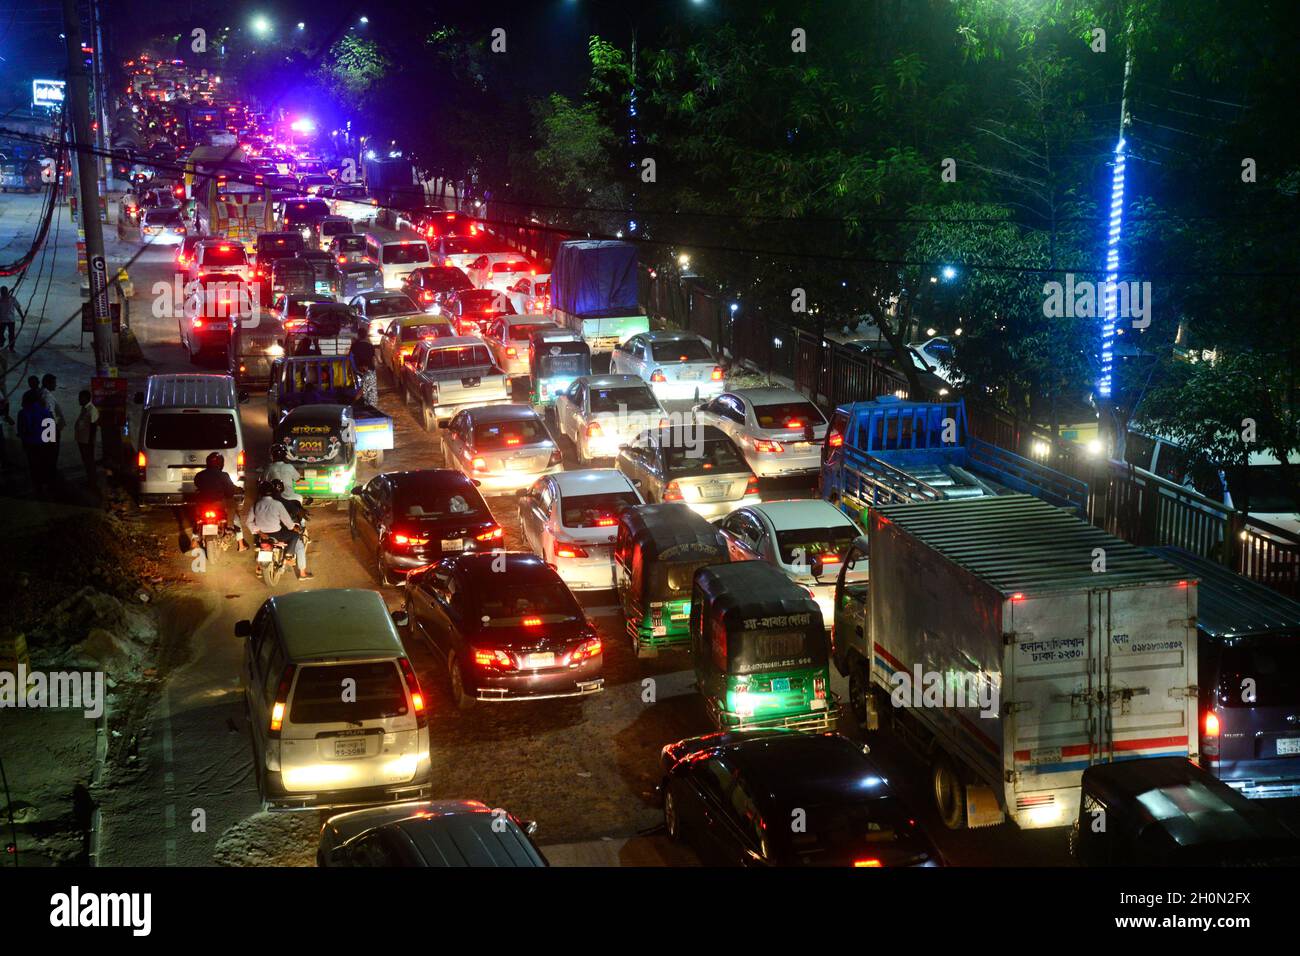 Commuters make their way through a traffic jam at night during Covid-19 Coronavirus pandemic in Dhaka, Bangladesh, on October 13, 2021.Last 10 years in Dhaka, average traffic speed has dropped from 21 km/hour to 7 km/hour, only slightly above the average walking speed. Congestion in Dhaka eats up 3.2 million working hours per day according to static reports. Stock Photo